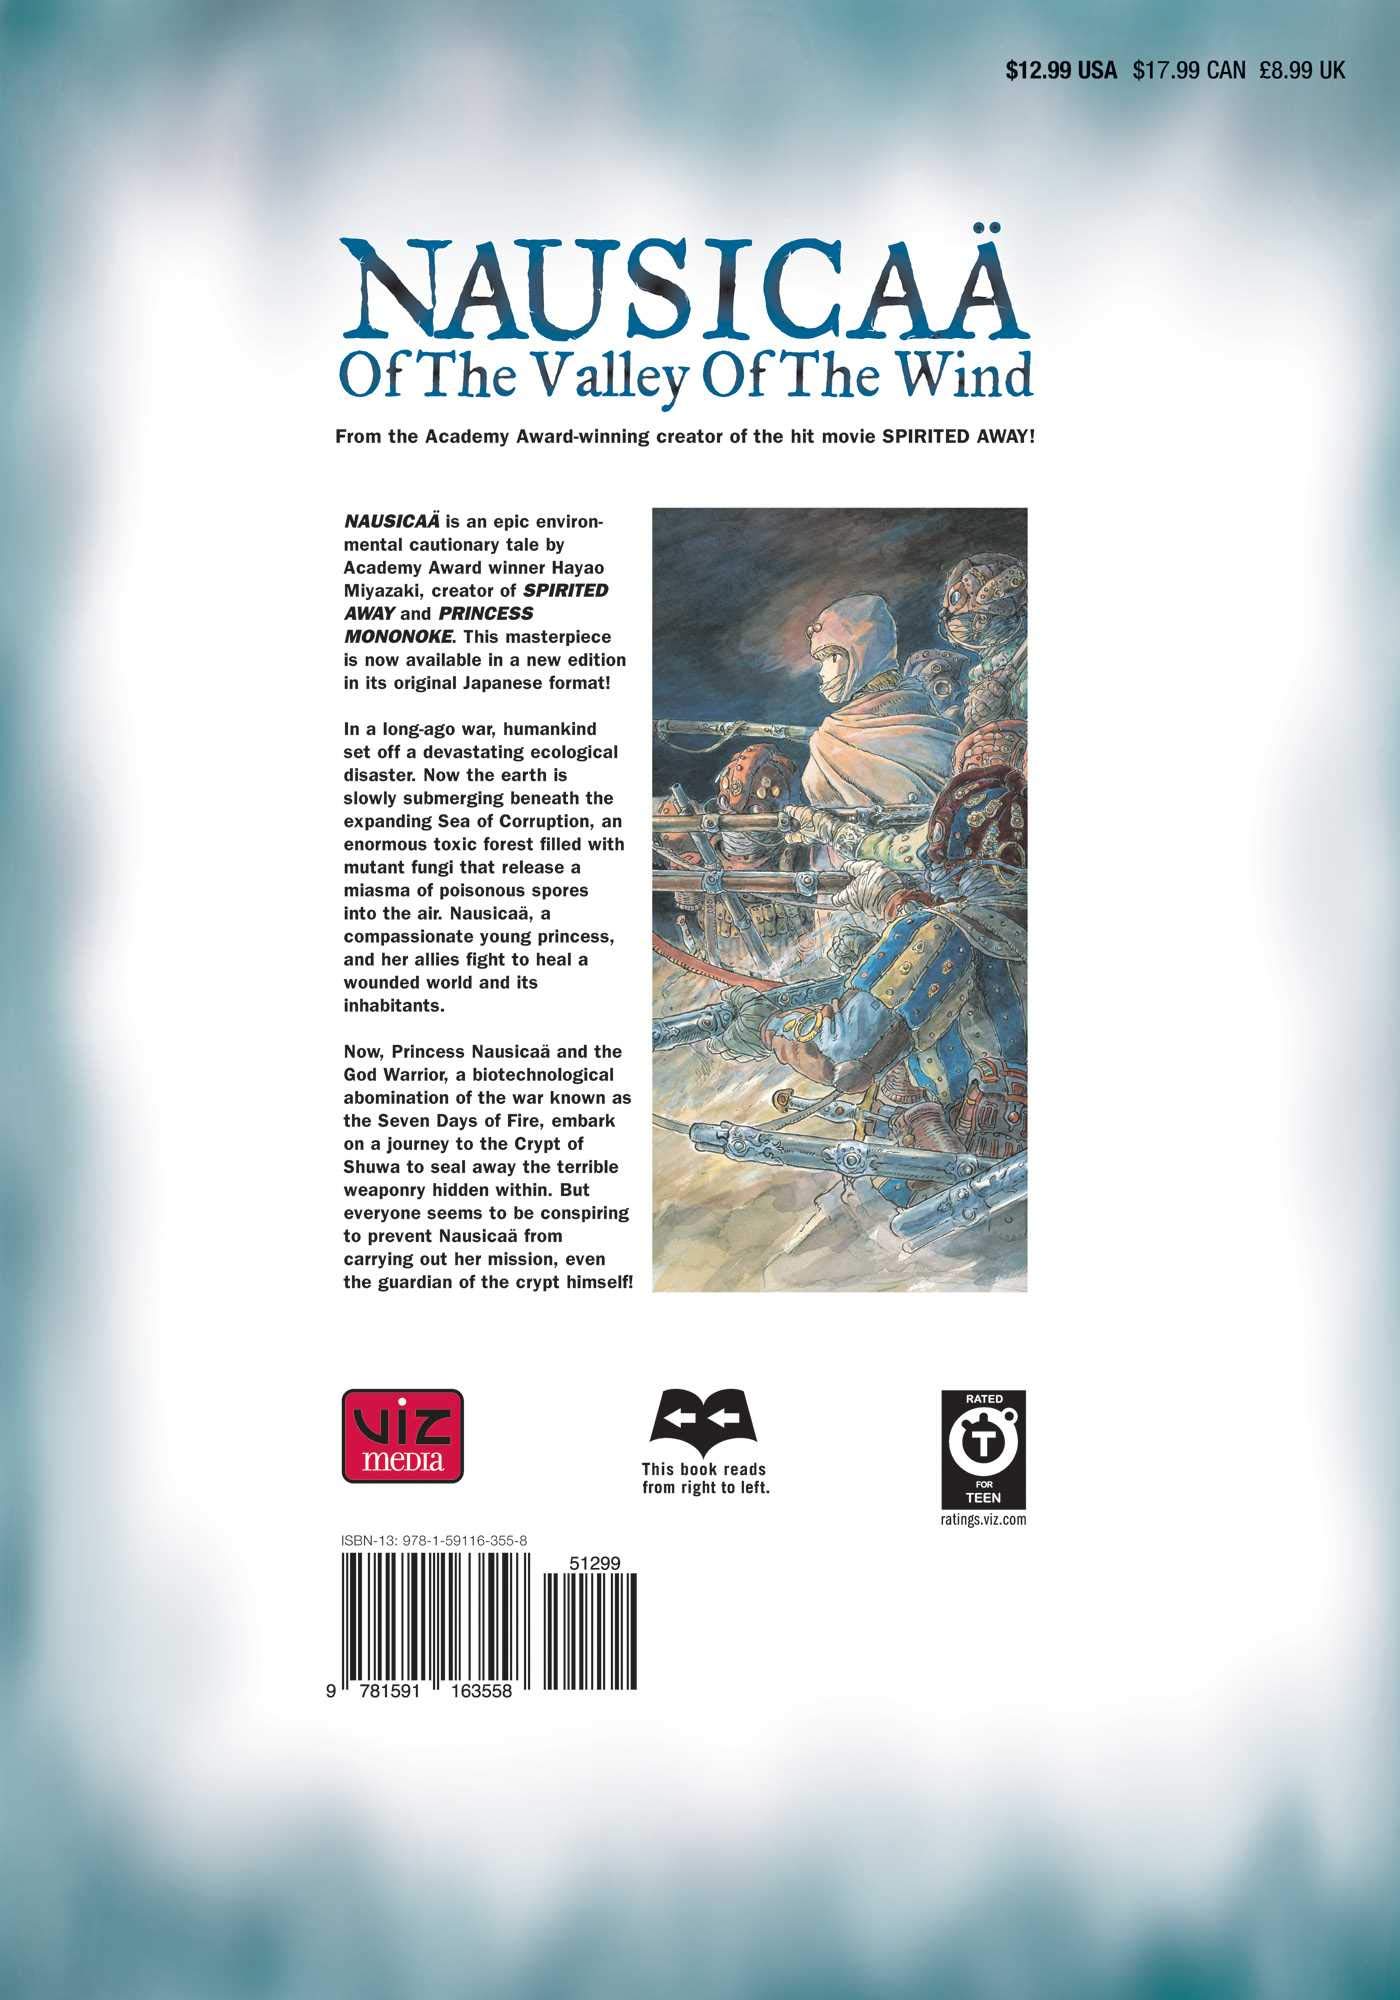 Nausicaa of the Valley of the Wind, Vol. 7 (Nausicaä of the Valley of the Wind)